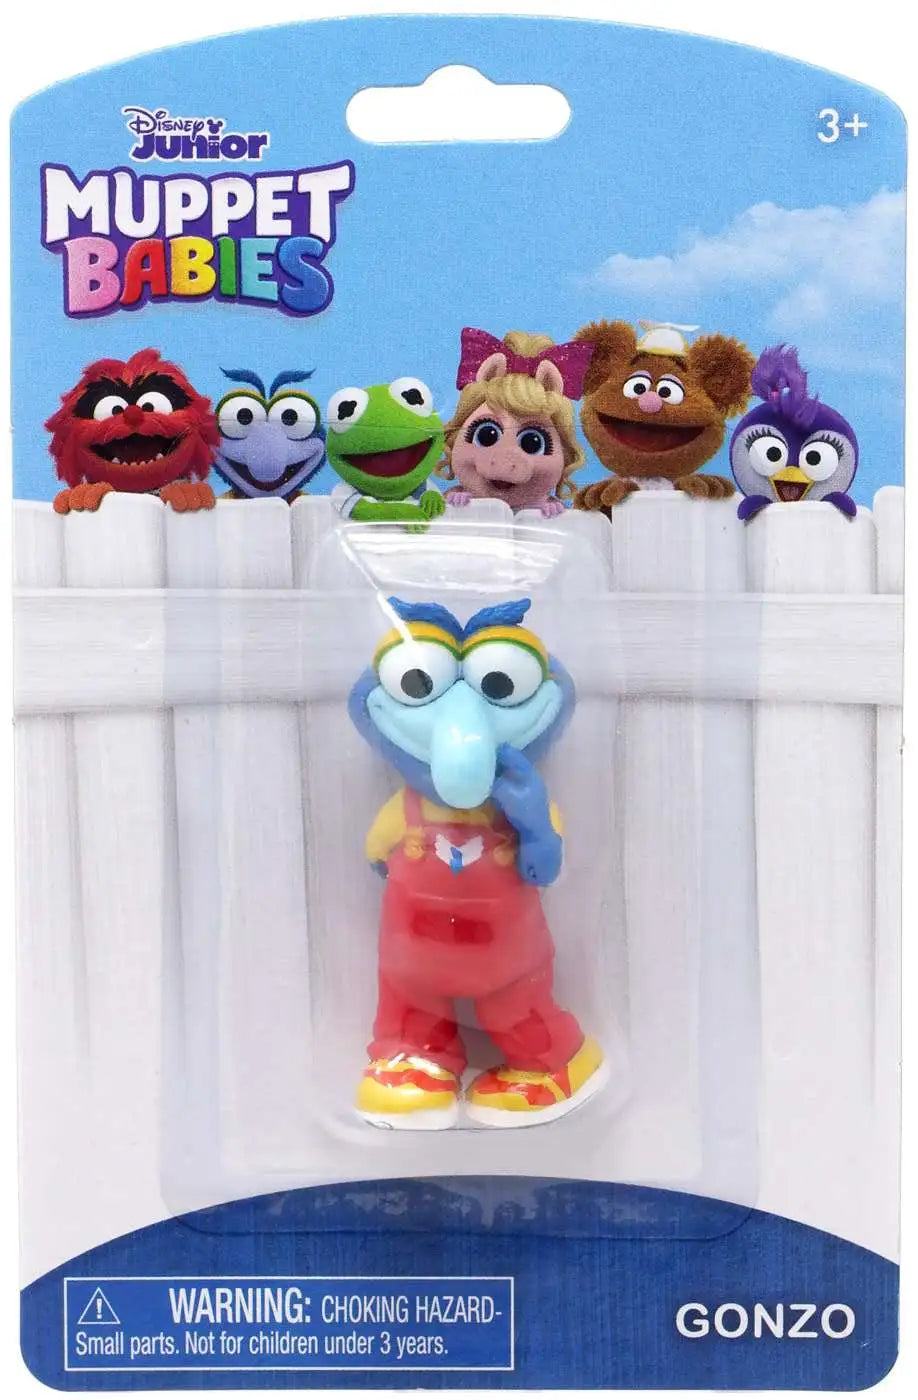 MUPPET BABIES: GONZO - JUST PLAY-2019